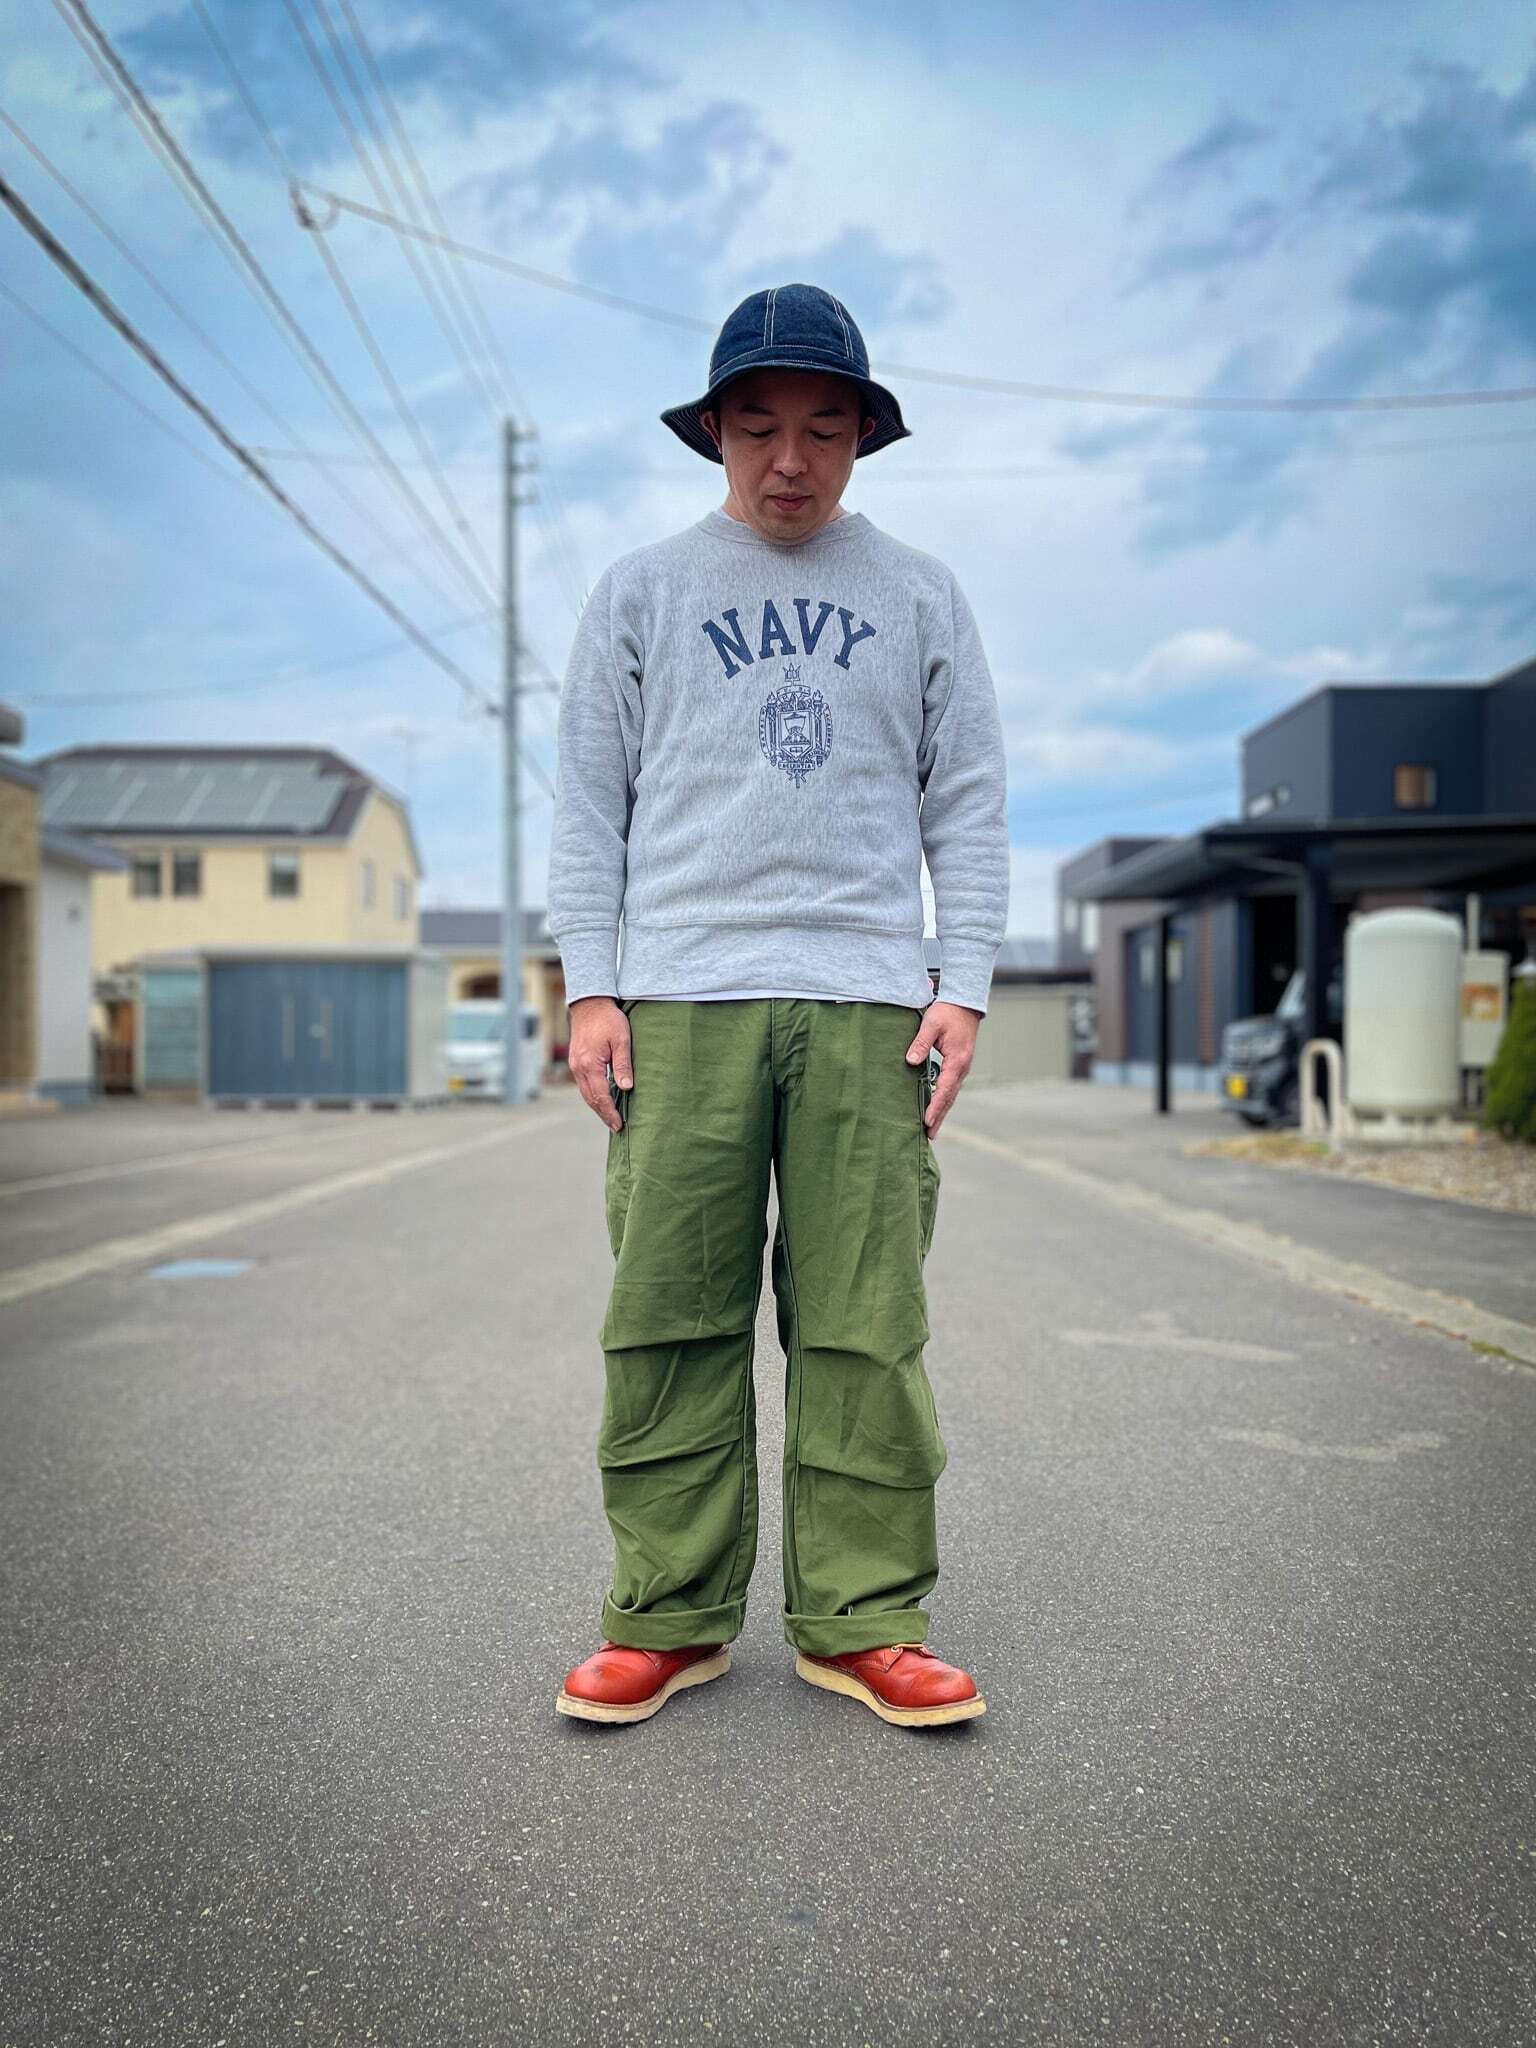 S SU.S.Army M Field Trousers "Used" アメリカ軍 M カーゴ